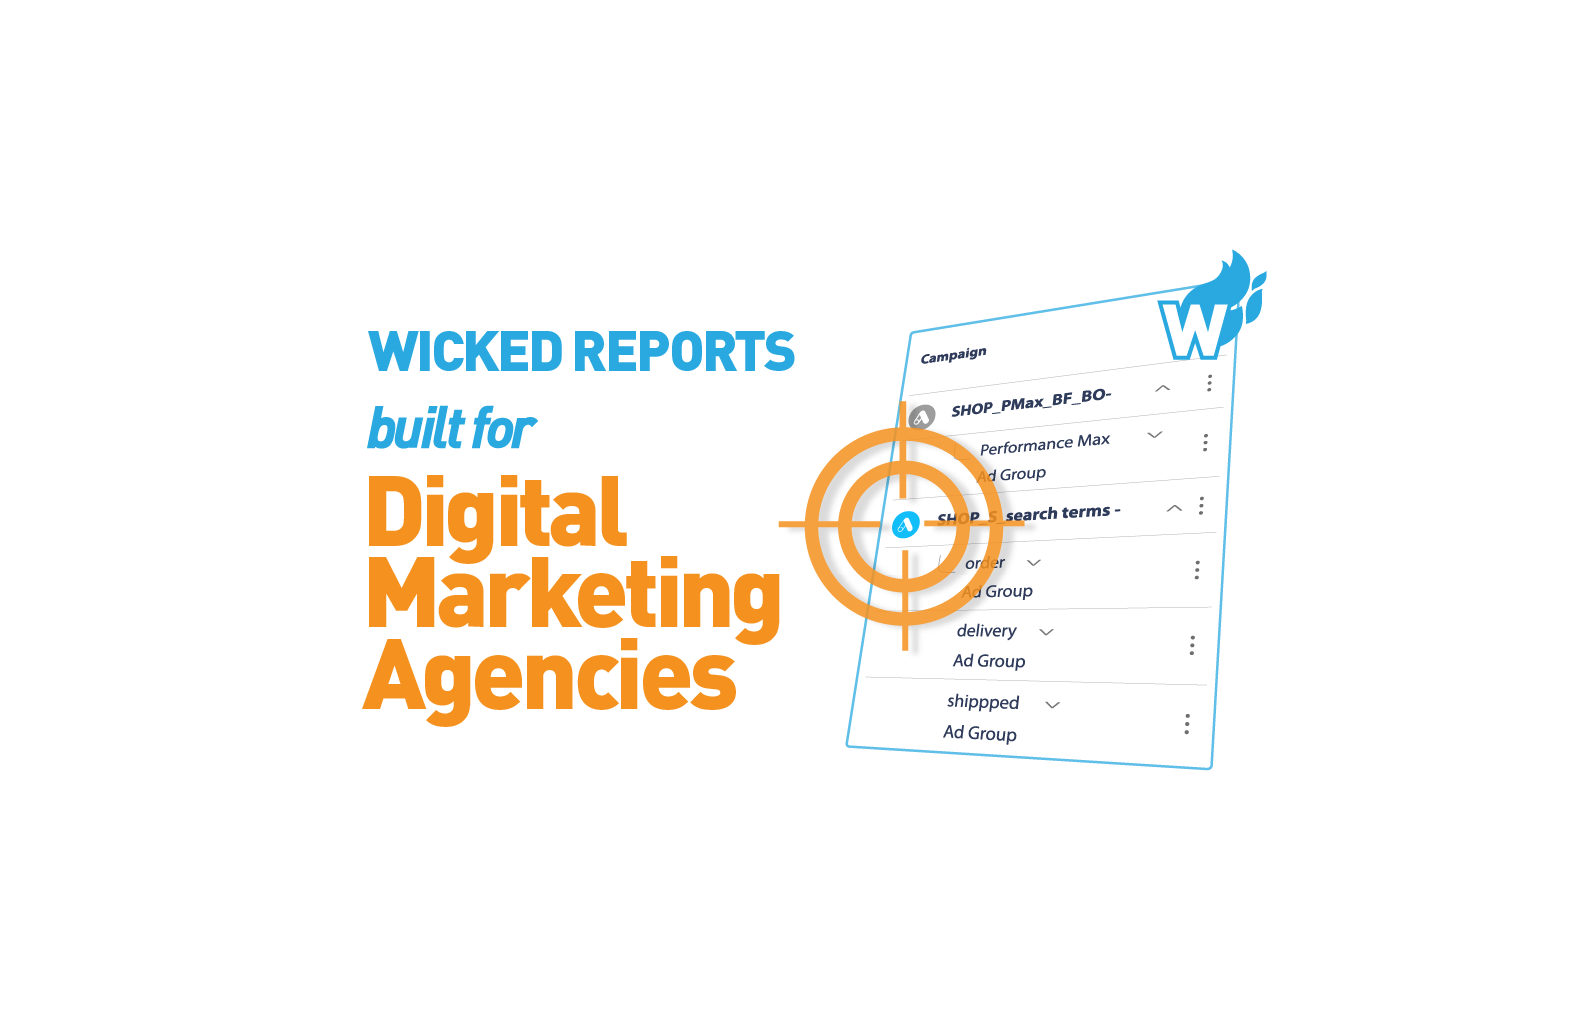 How to retain clients for digital marketing agencies using full funnel marketing attribution and Wicked Reports